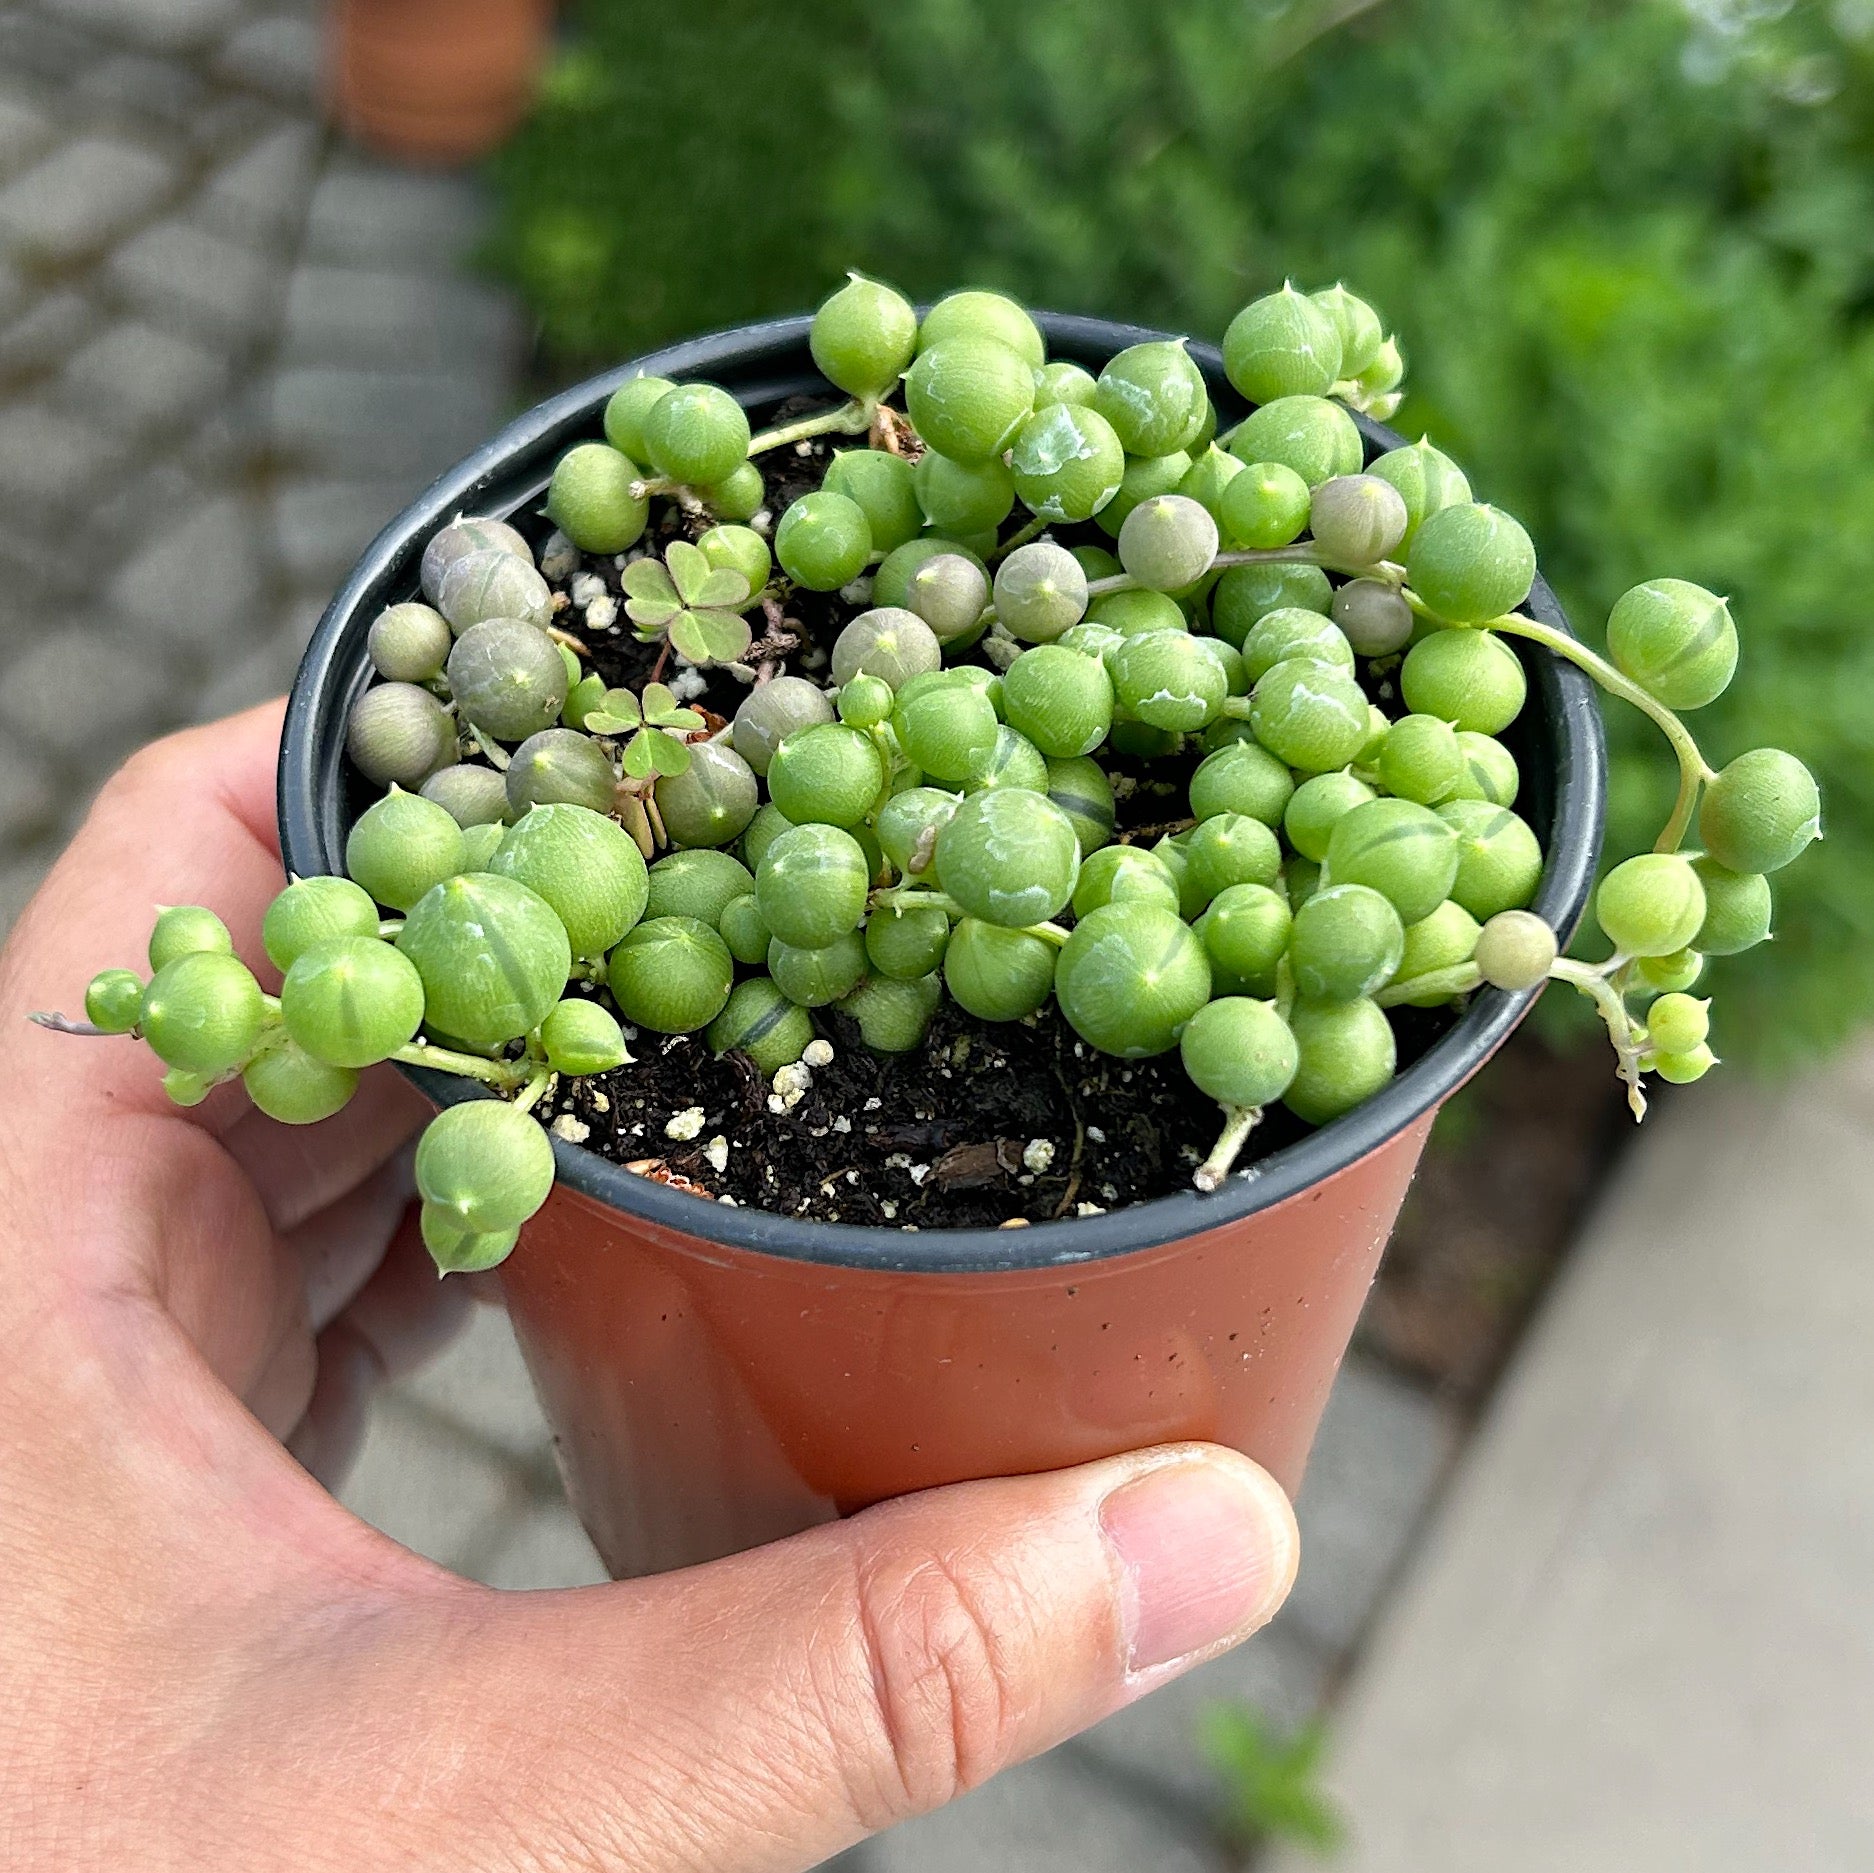 String of pearls